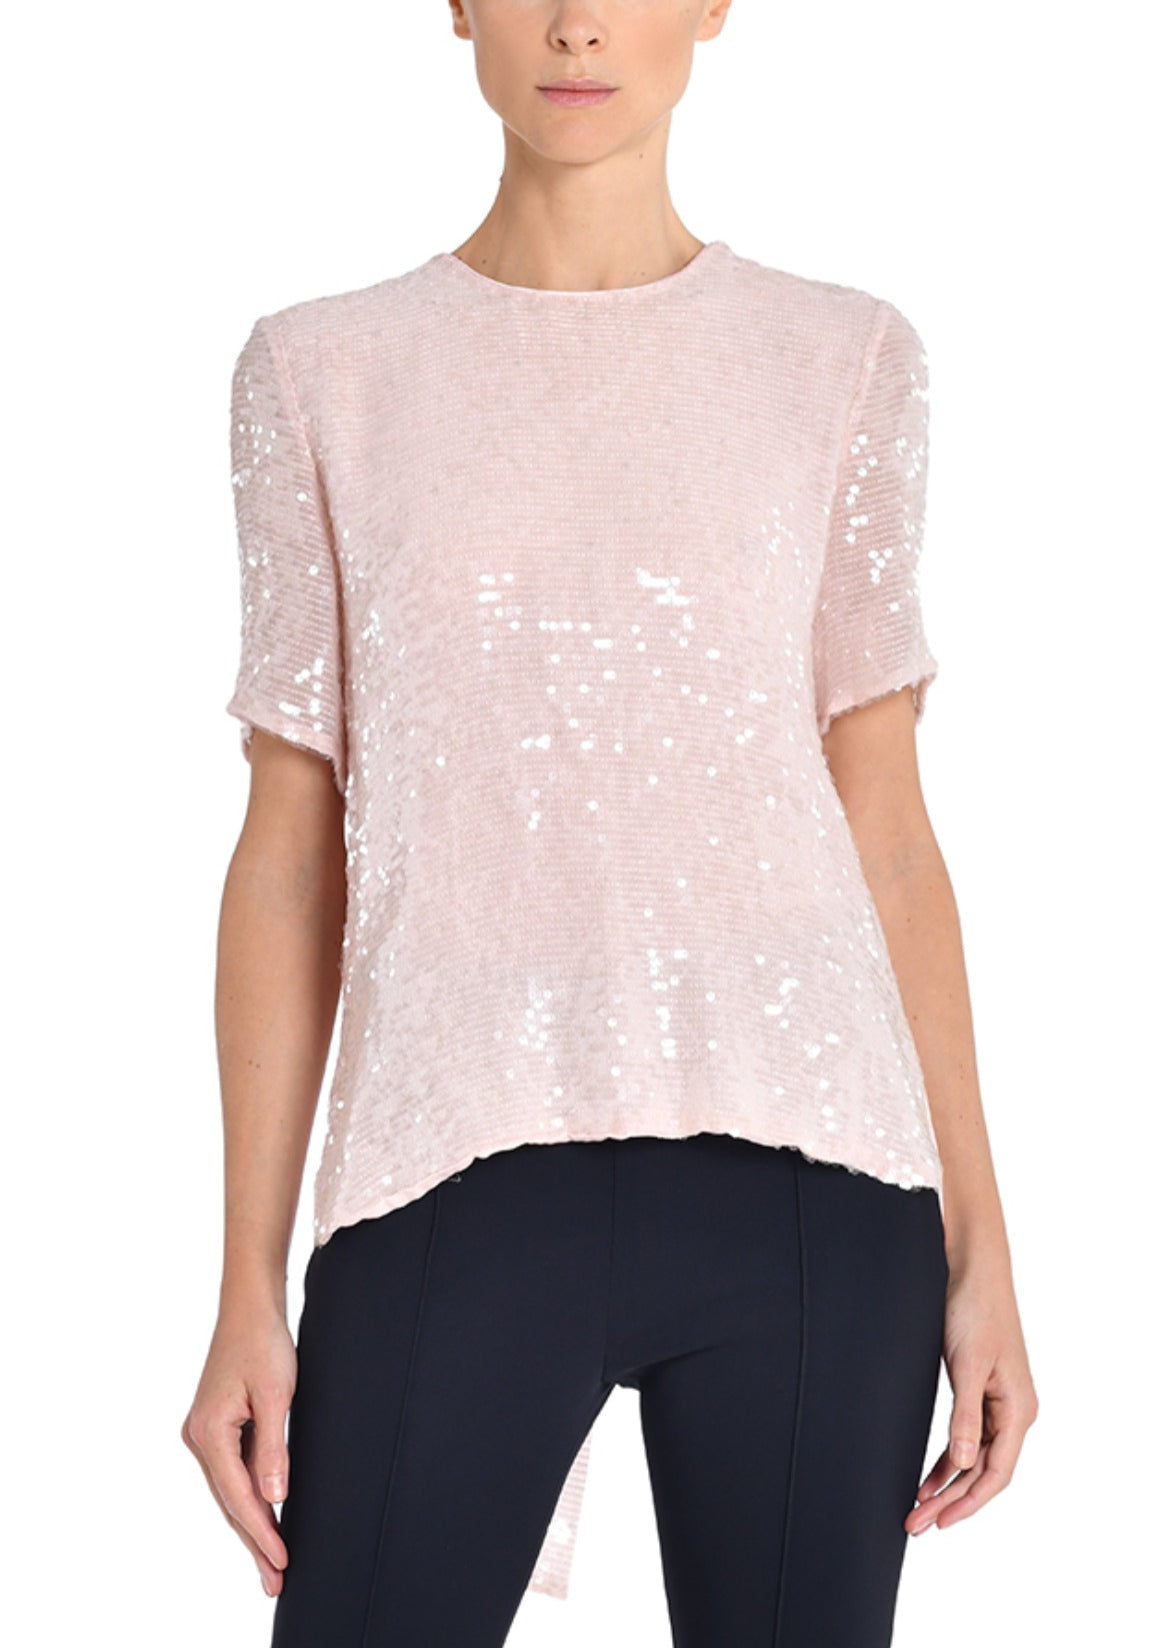 CROSS BACK T-SHIRT IN EMBROIDERED SEQUINS